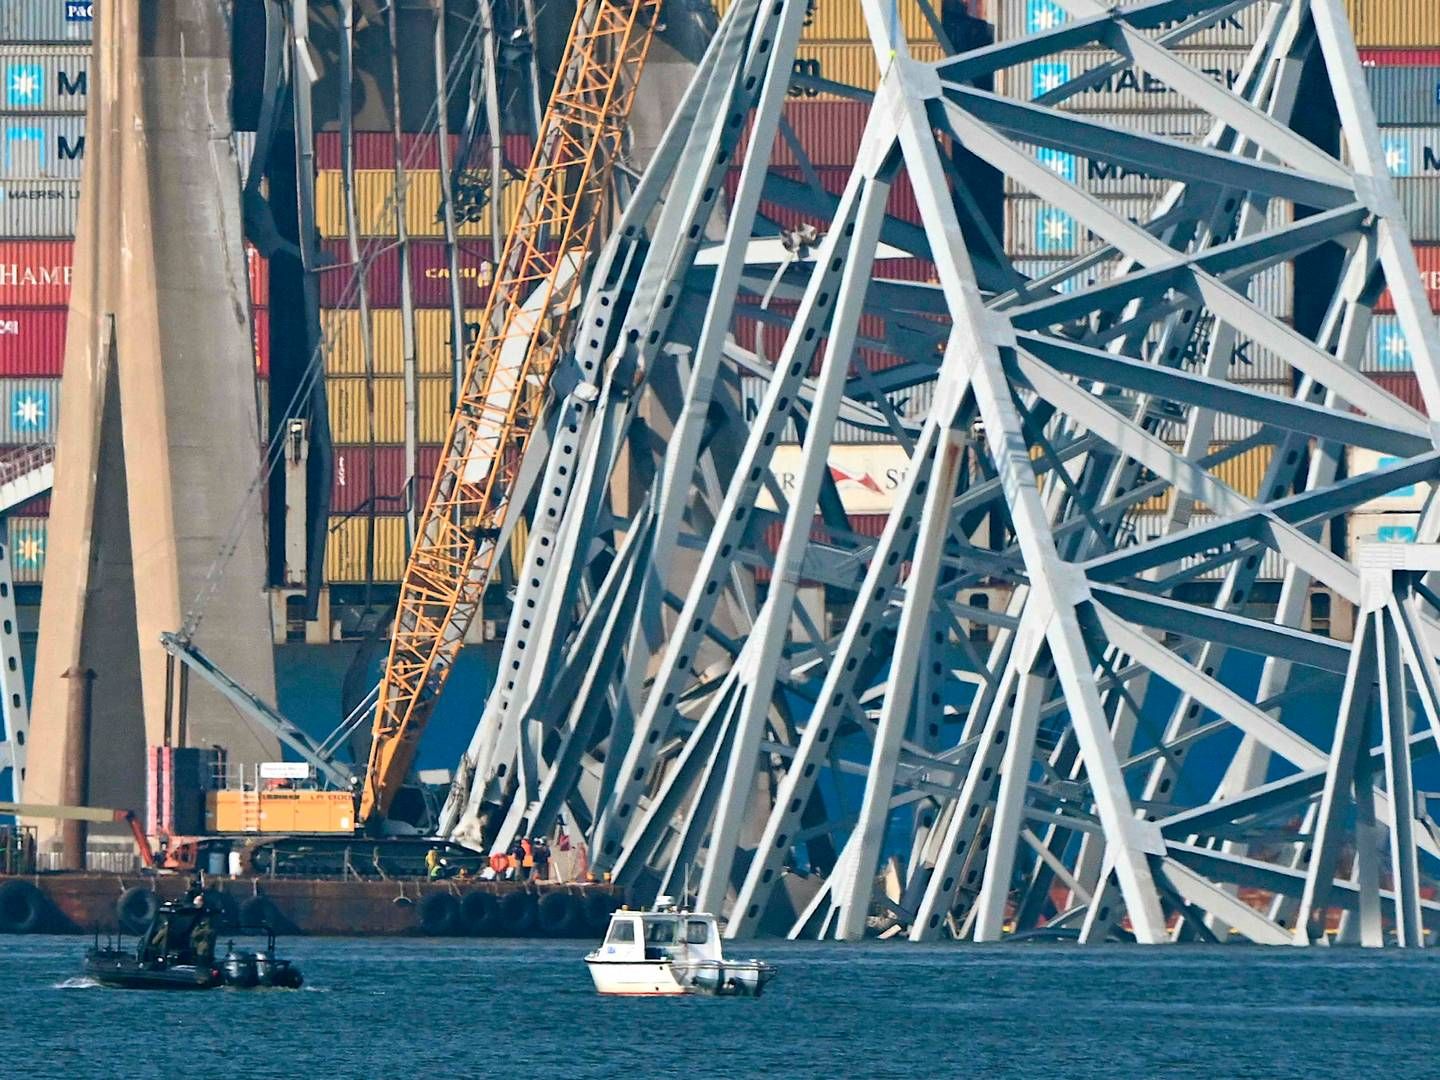 ”This will help us get more vessels into the water around the area where the bridge collapsed,” Maryland Governor Wes Moore said at a press conference.